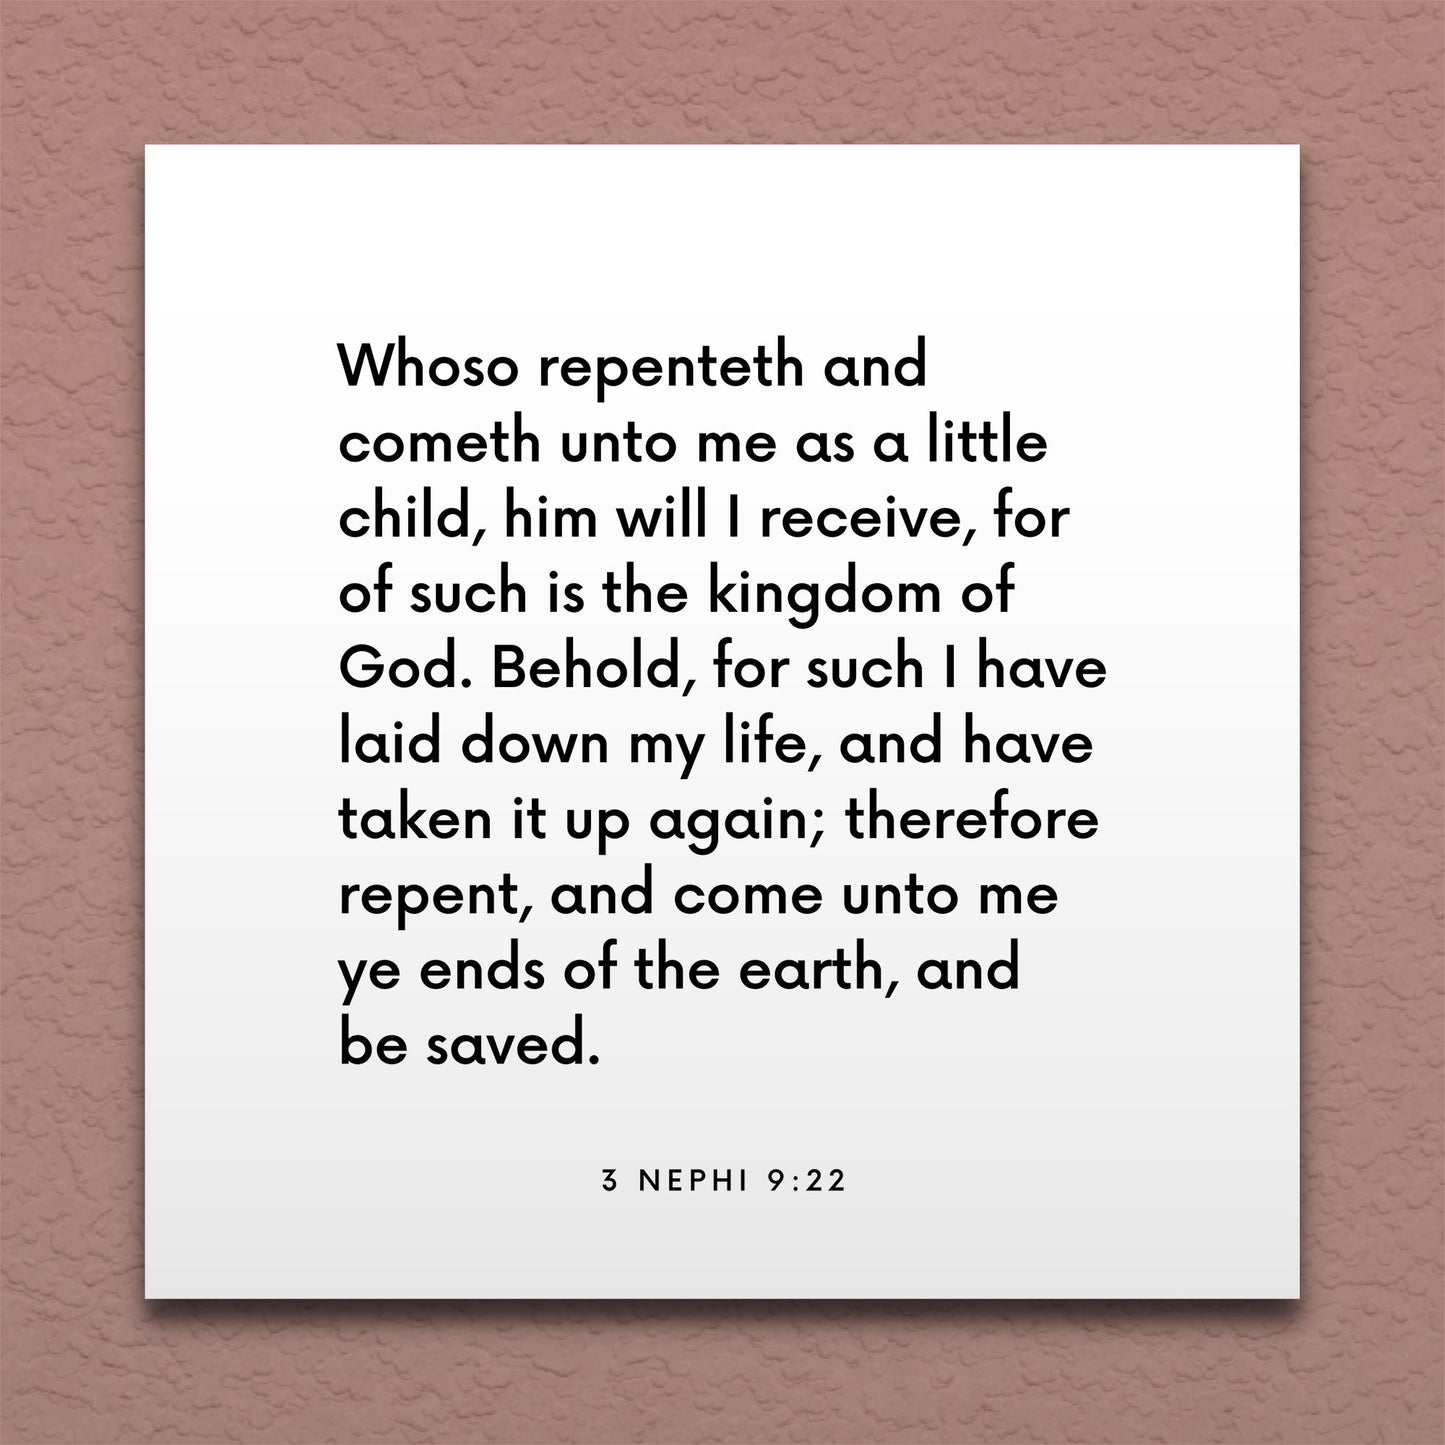 Wall-mounted scripture tile for 3 Nephi 9:22 - "Whoso repenteth and cometh unto me as a little child"